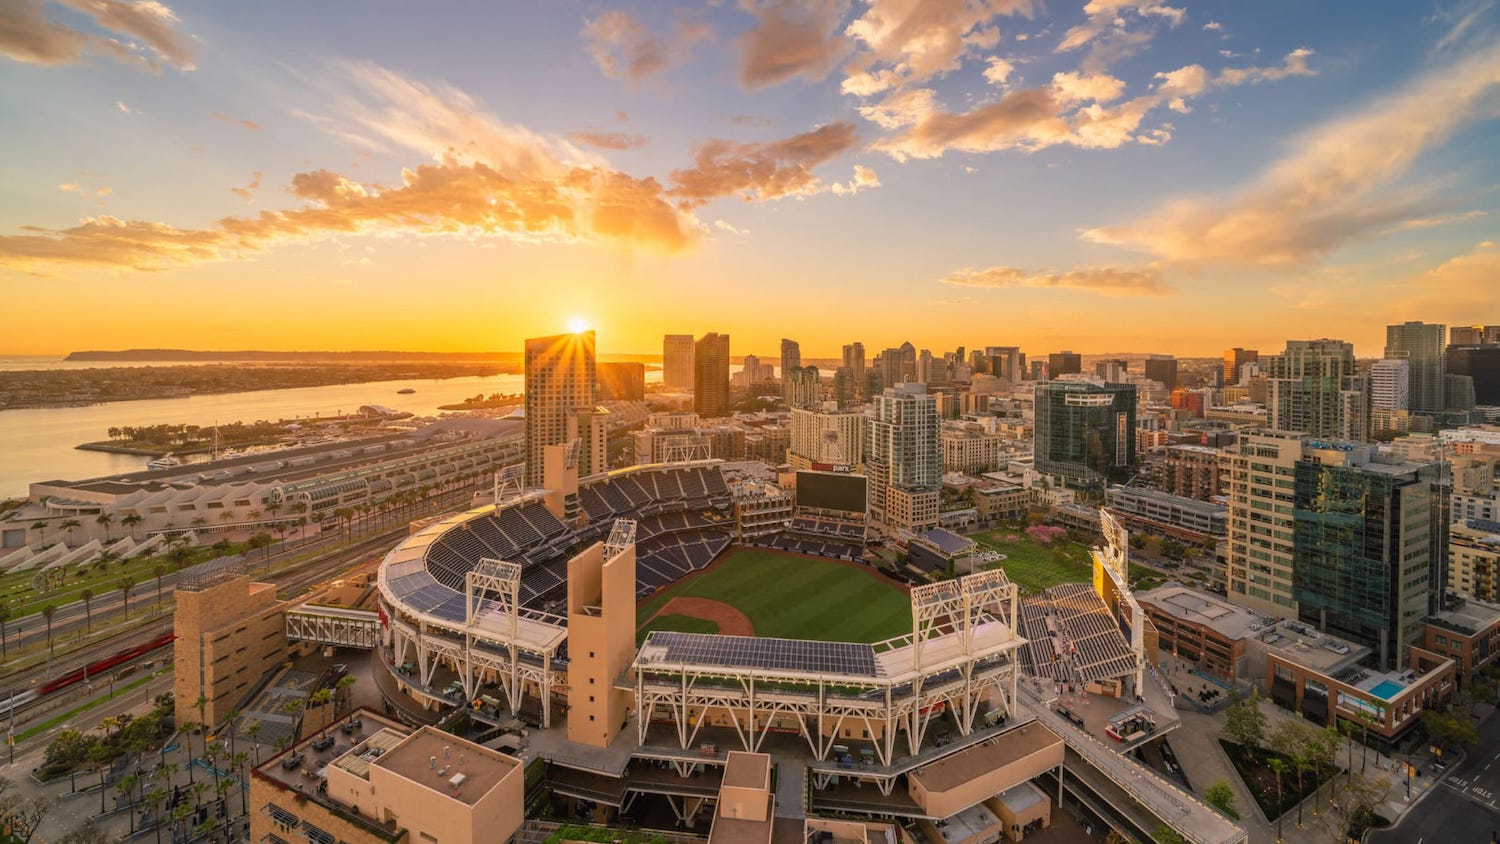 Things to do in San Diego that don't involve alcohol featuring a Padres game at Petco Park